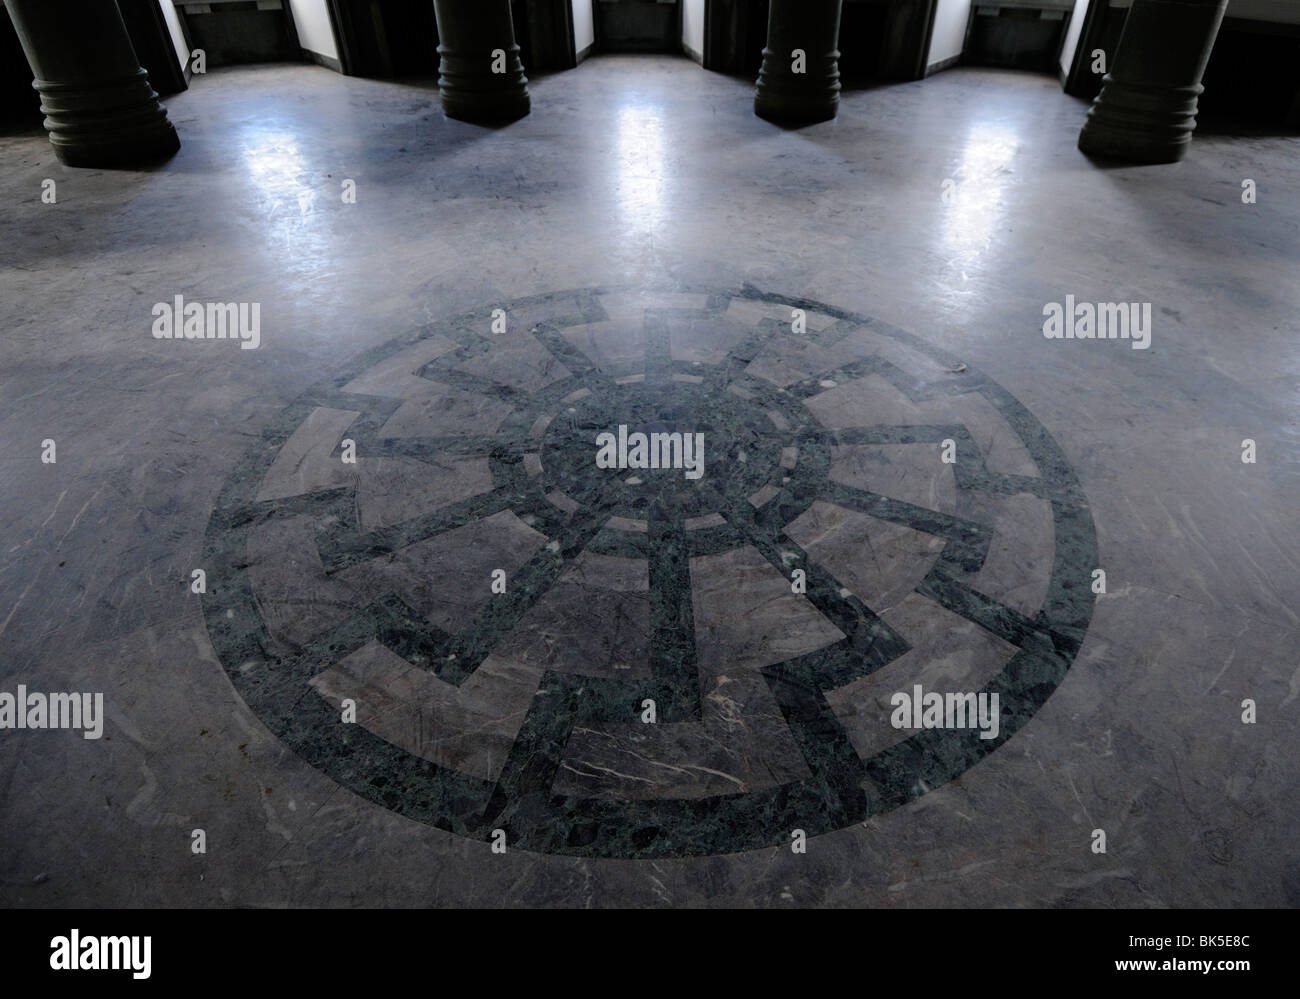 Occult symbol of a black sun in the floor of the Hall of SS Generals, Wewelsburg Castle, Germany Stock Photo